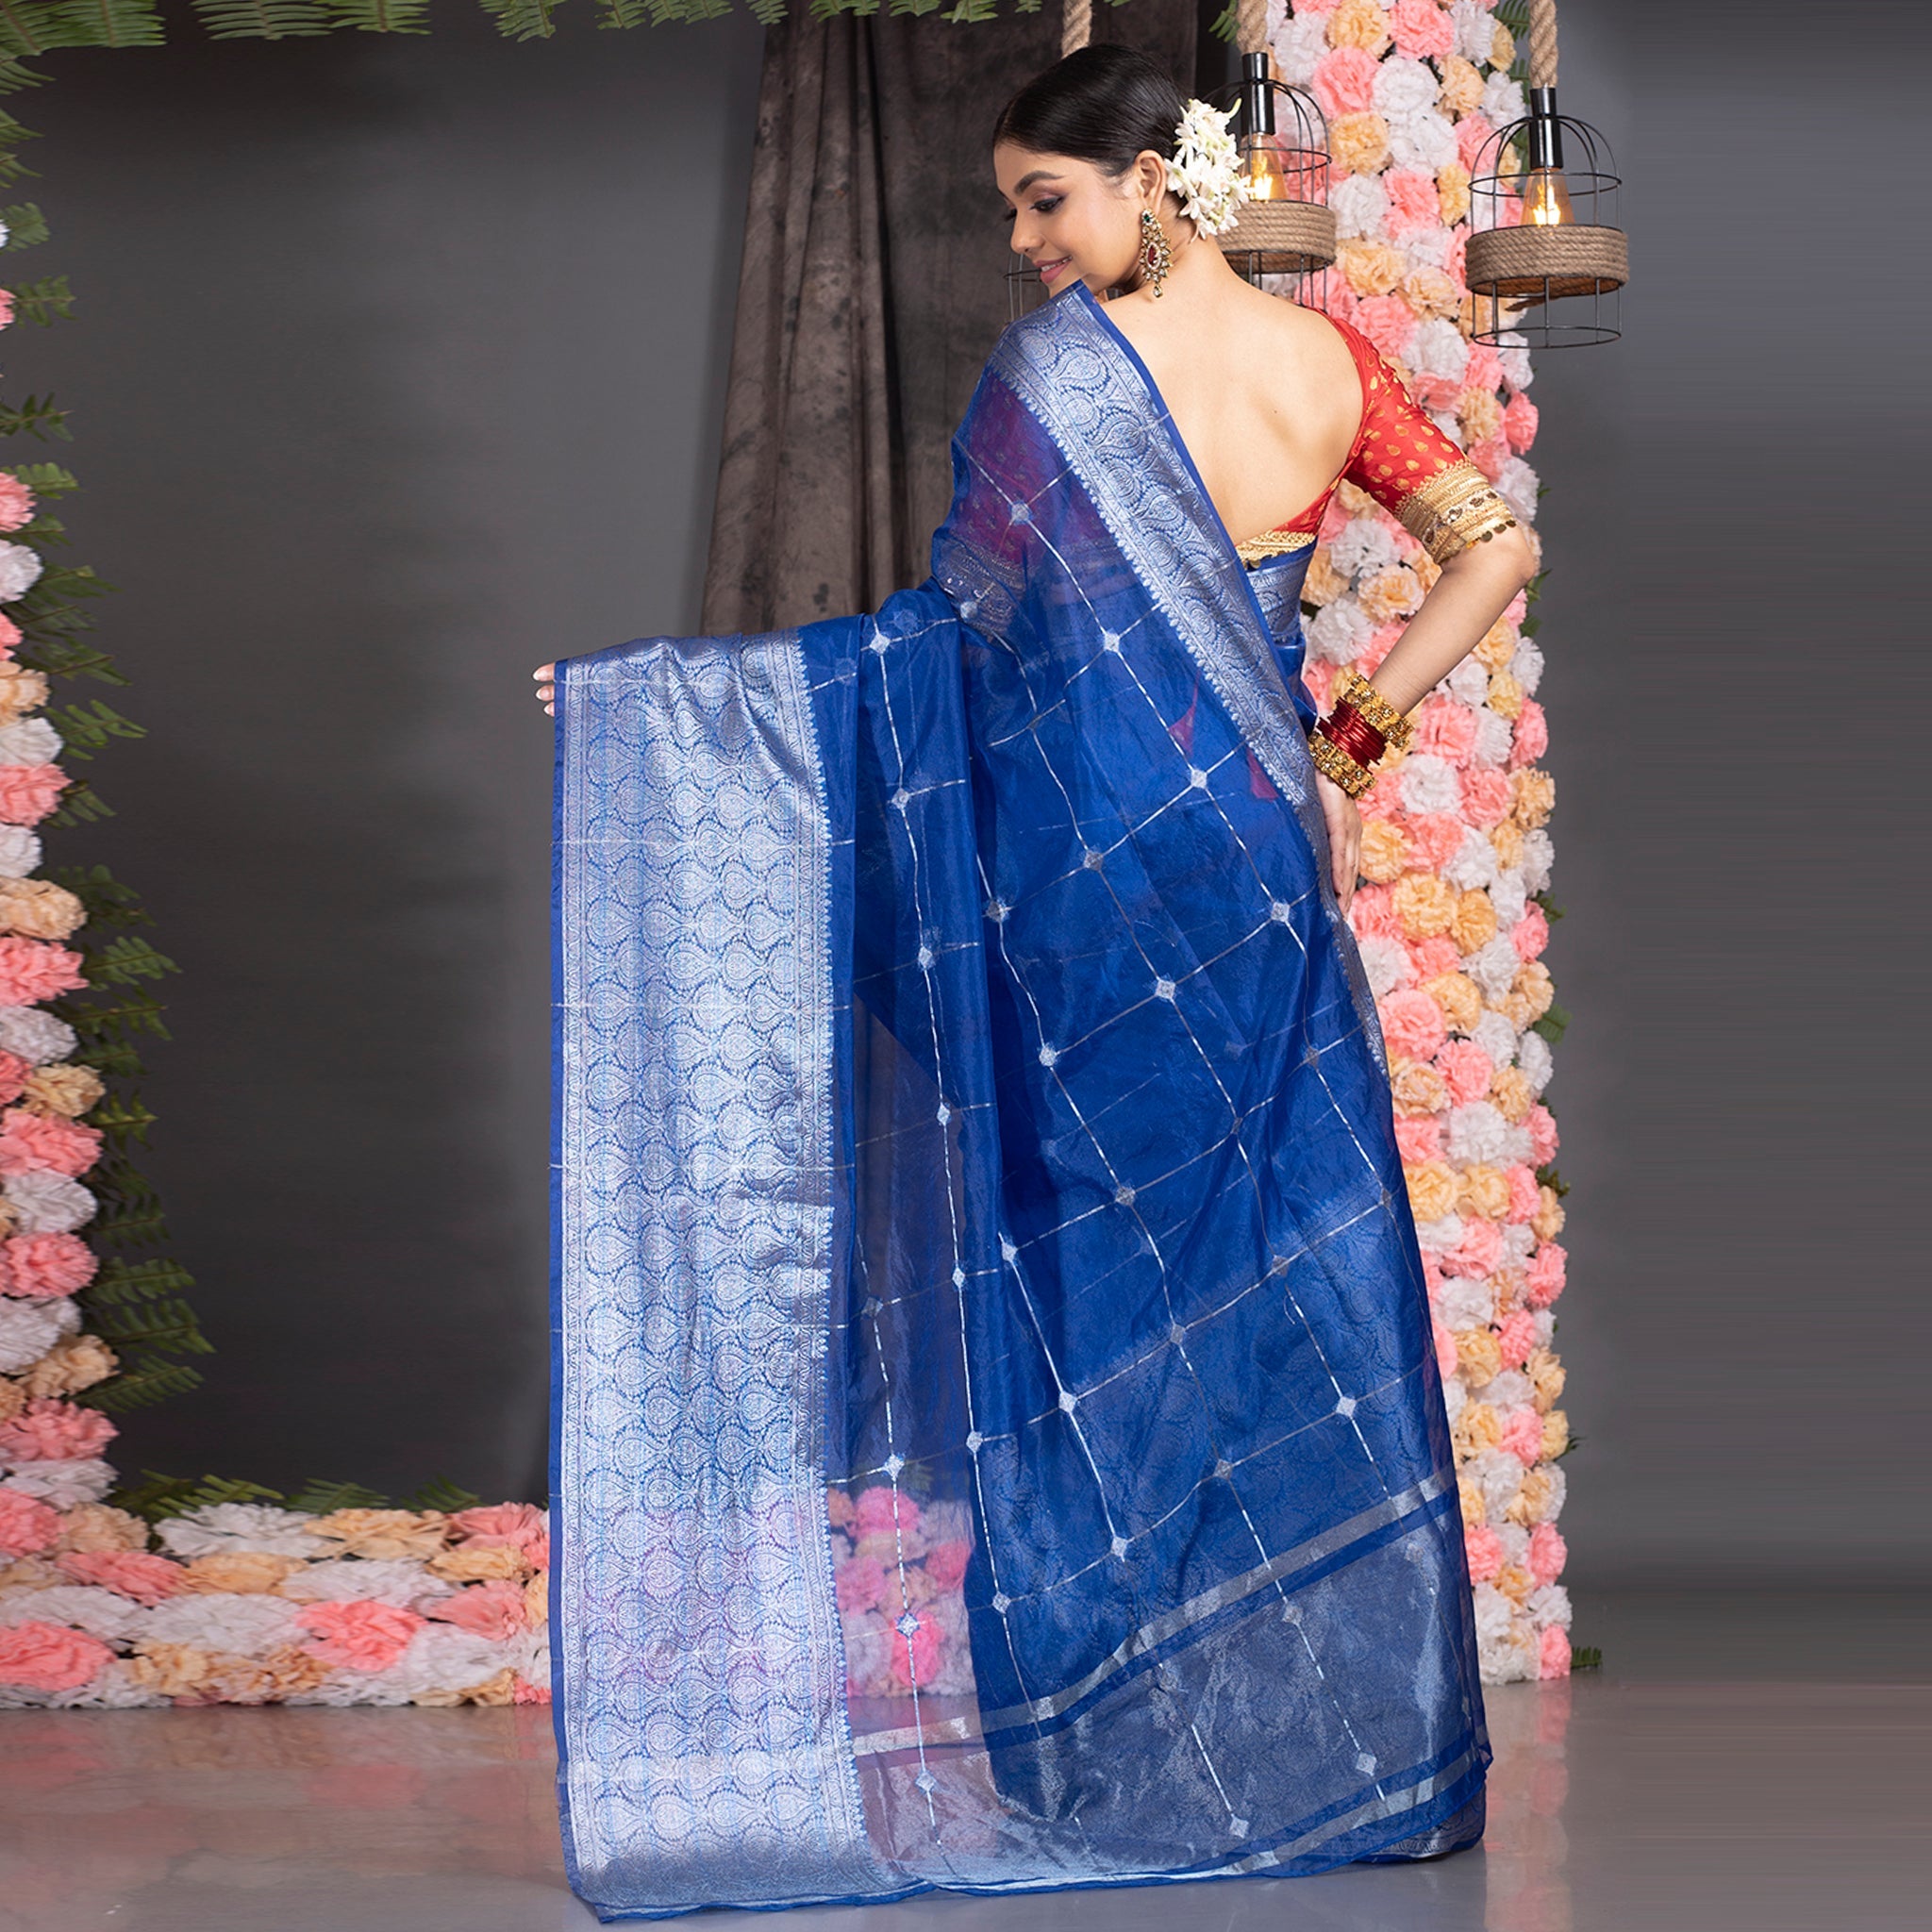 Women's Royal Blue Organza Saree With Square Motifs And Ambi Jaal Border - Boveee